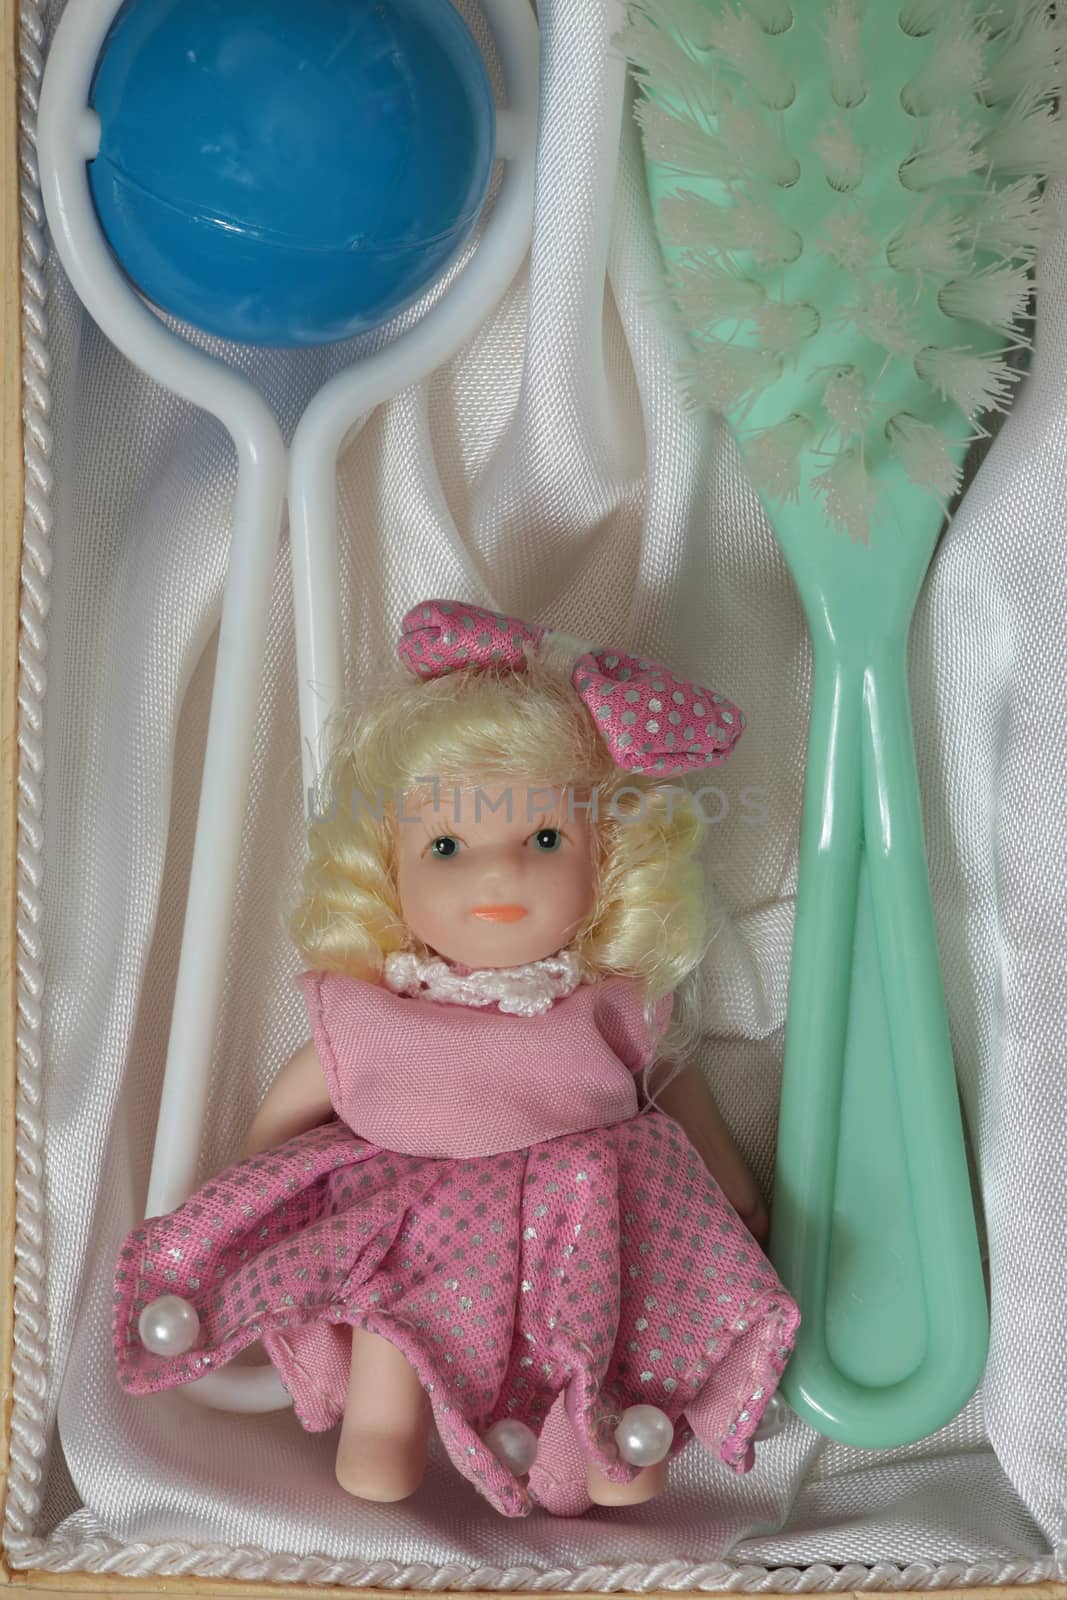 Doll Brush rattle present in the open box top view